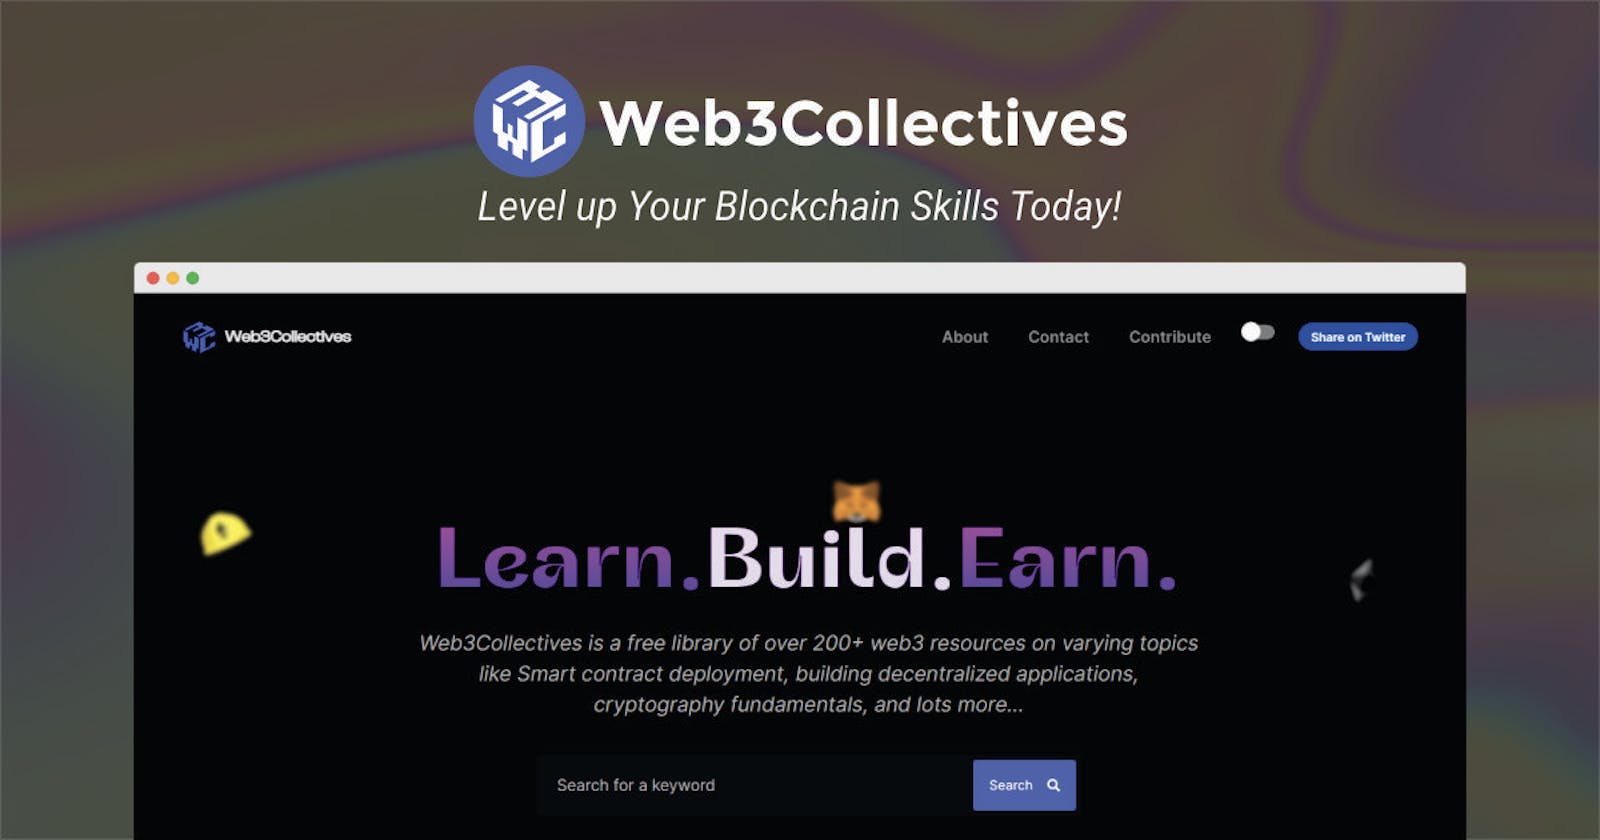 Introducing Web3Collectives - Your Gateway to Web3 Knowledge